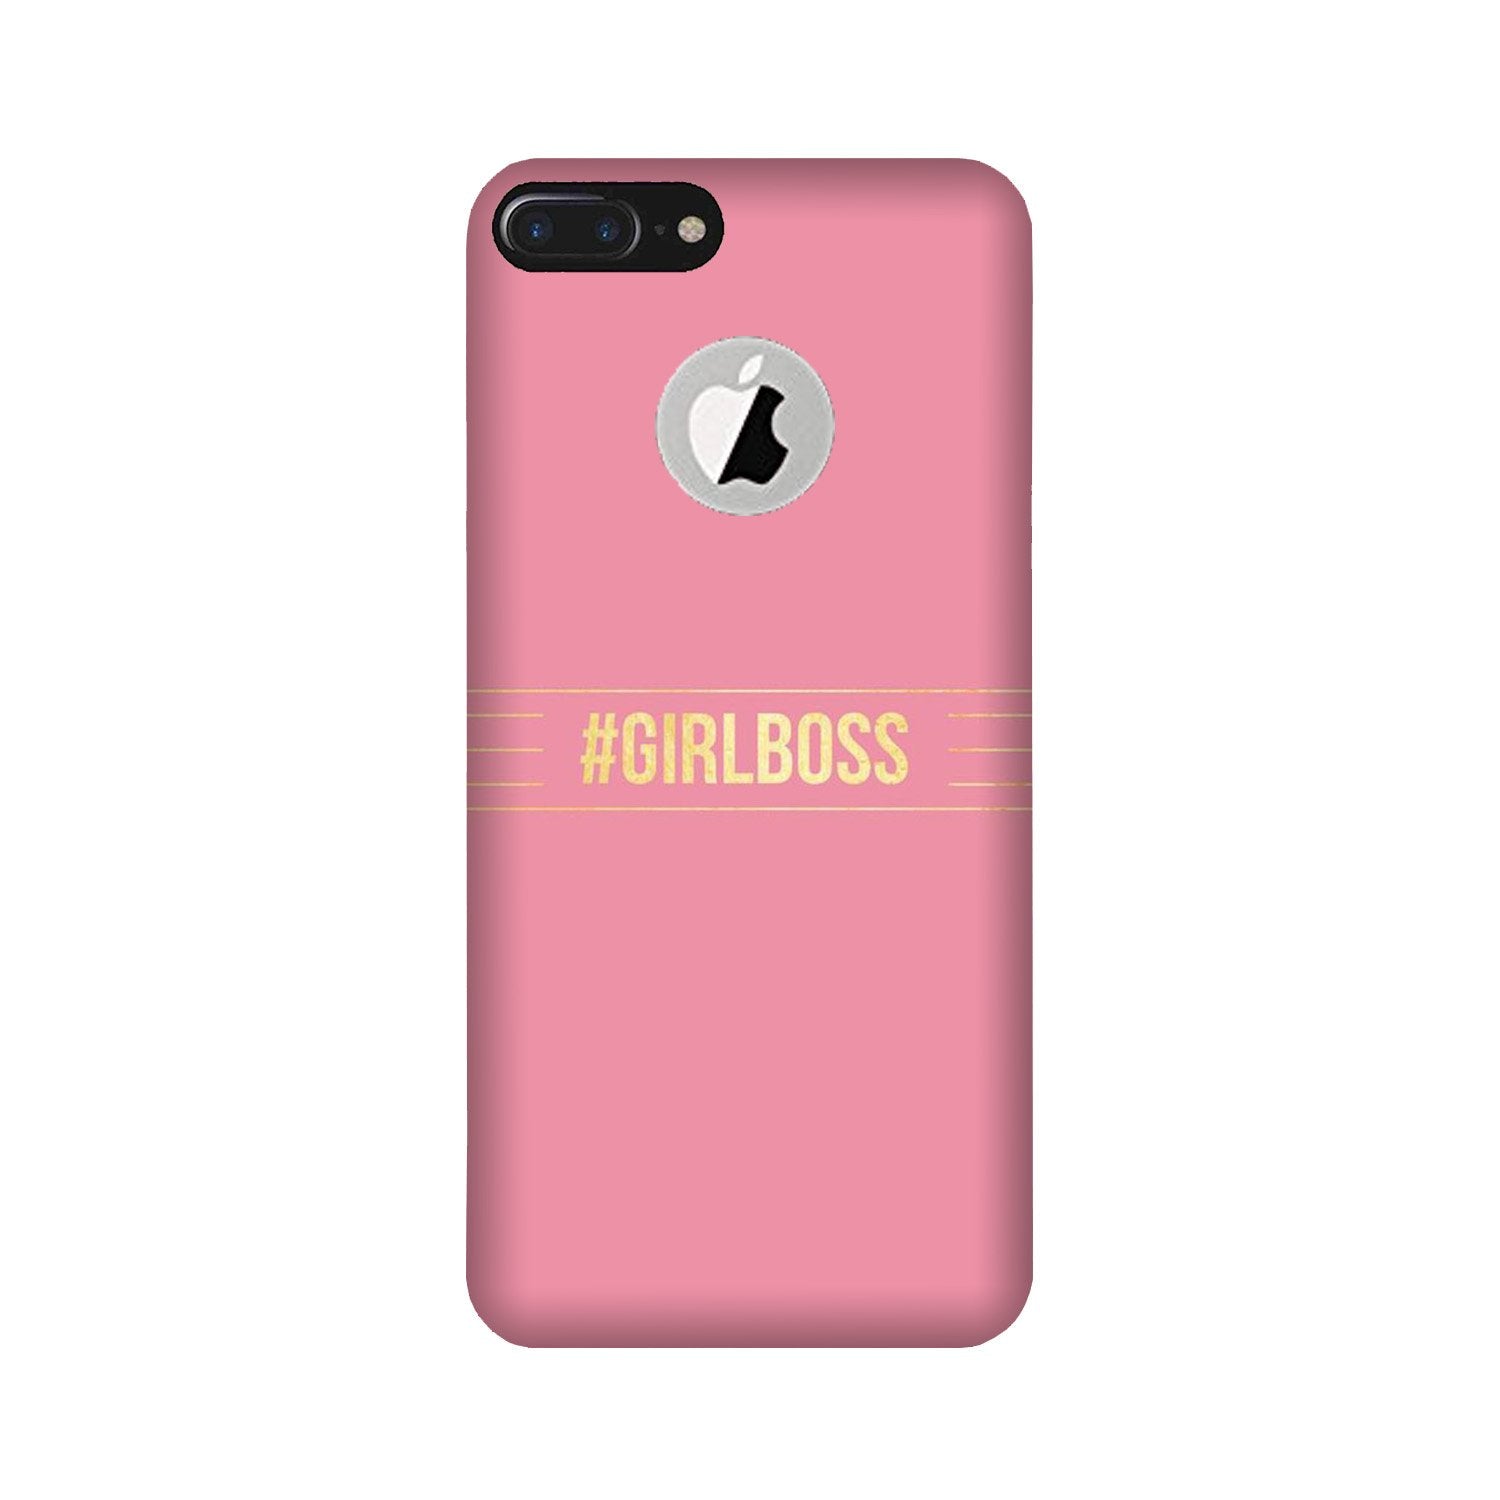 Girl Boss Pink Case for iPhone 7 Plus logo cut (Design No. 263)